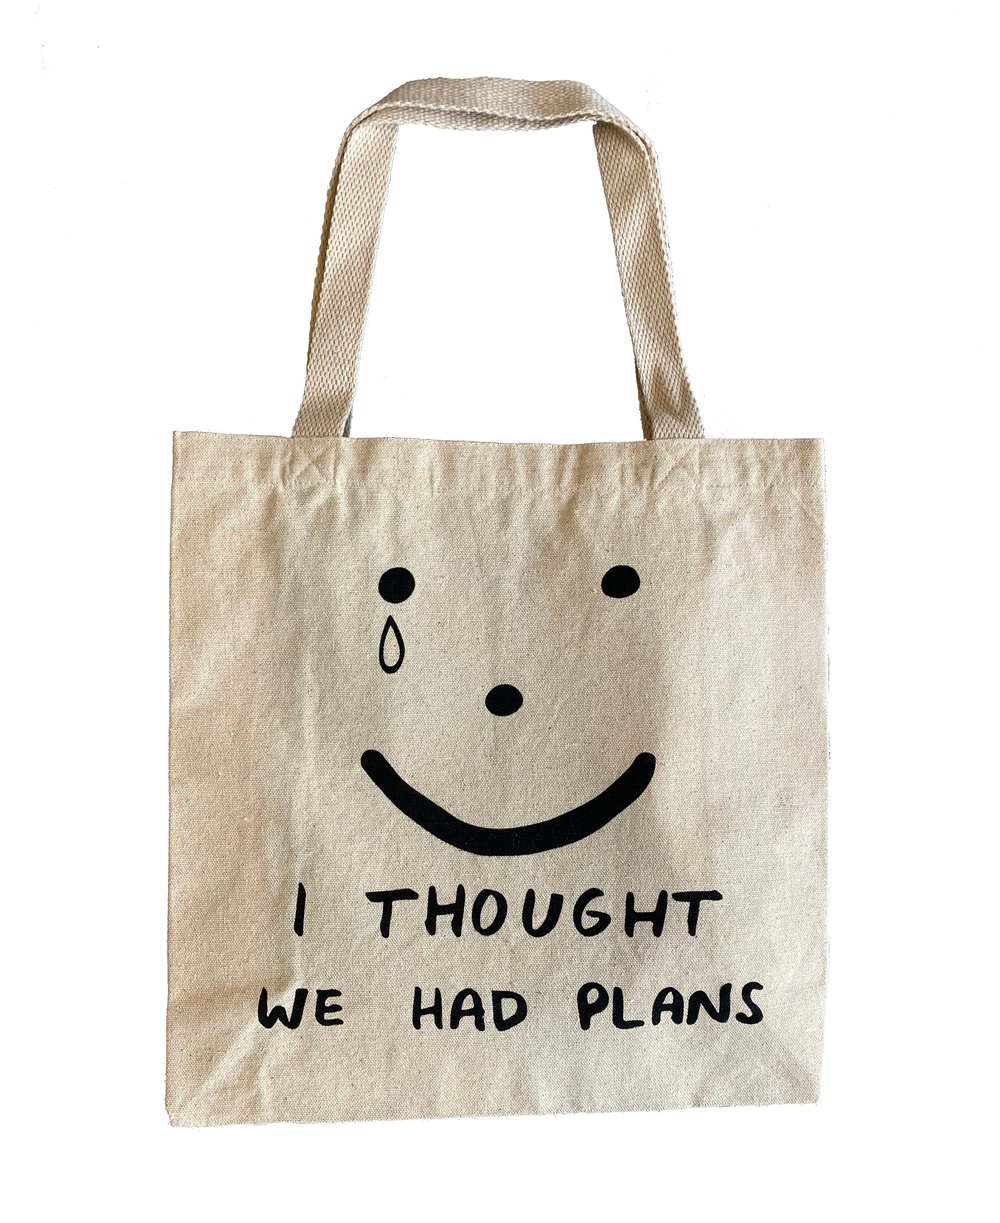 I THOUGHT WE HAD PLANS TOTE